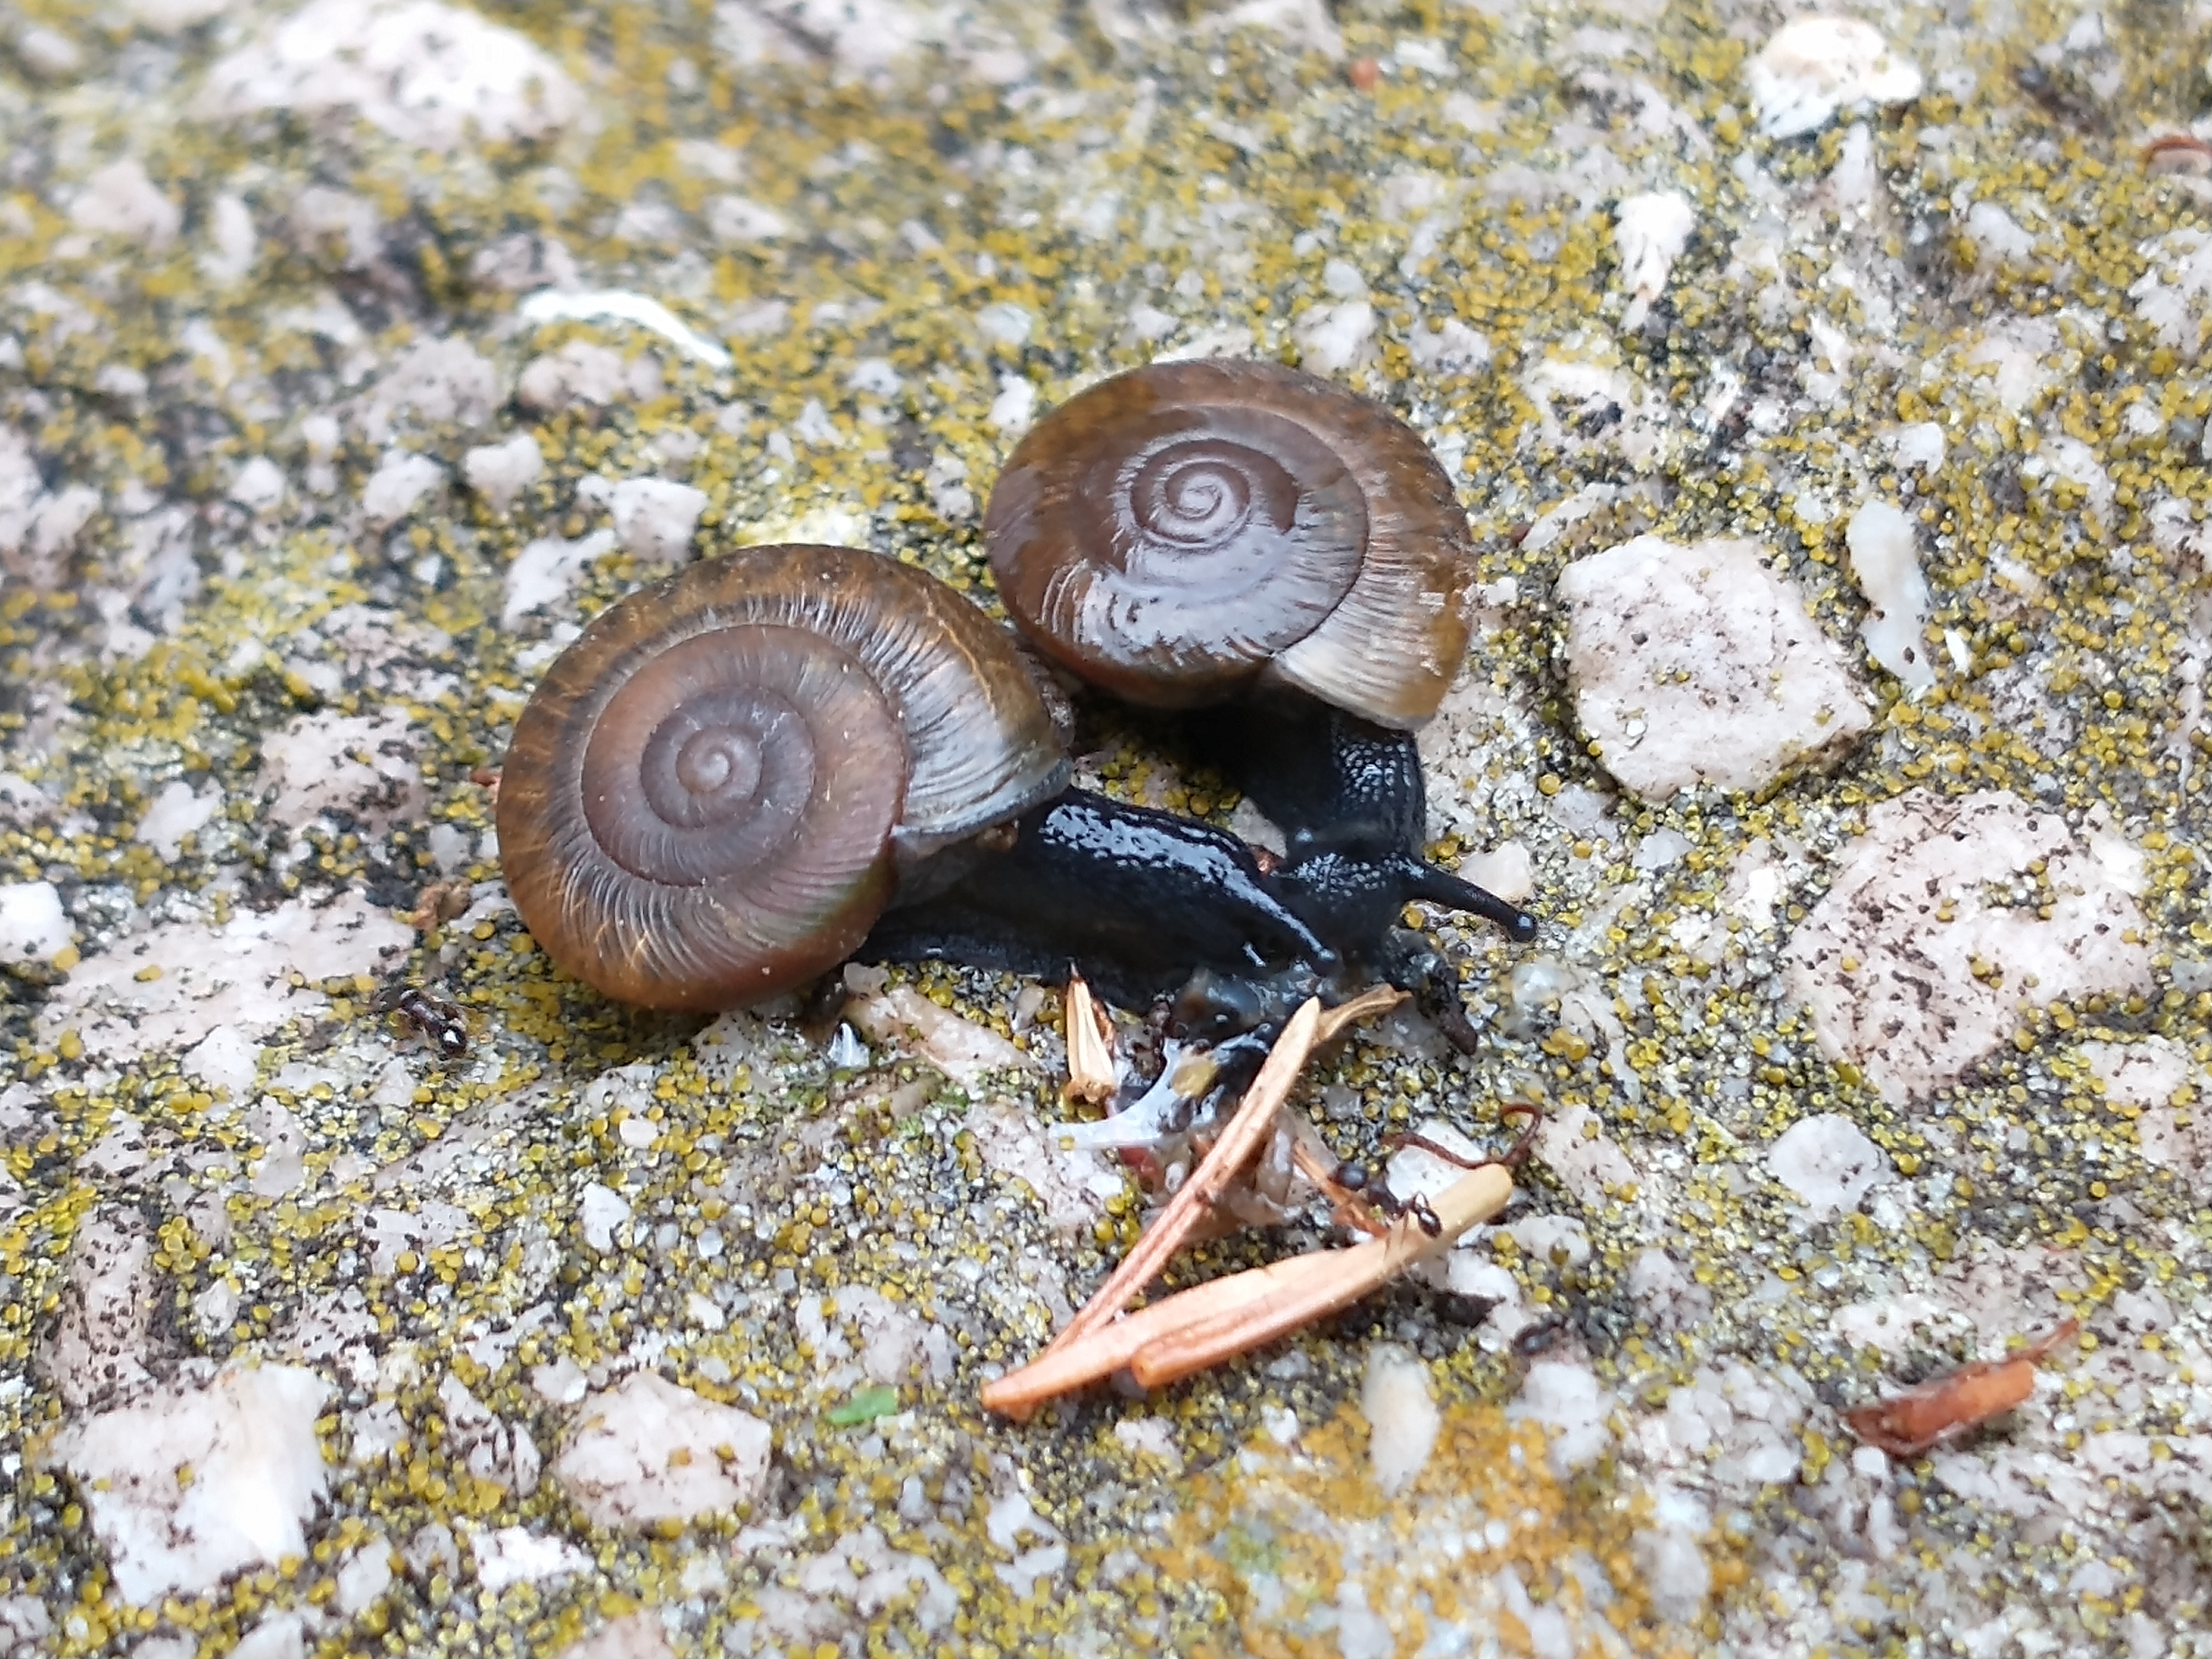 Two snails say hello in a garden 